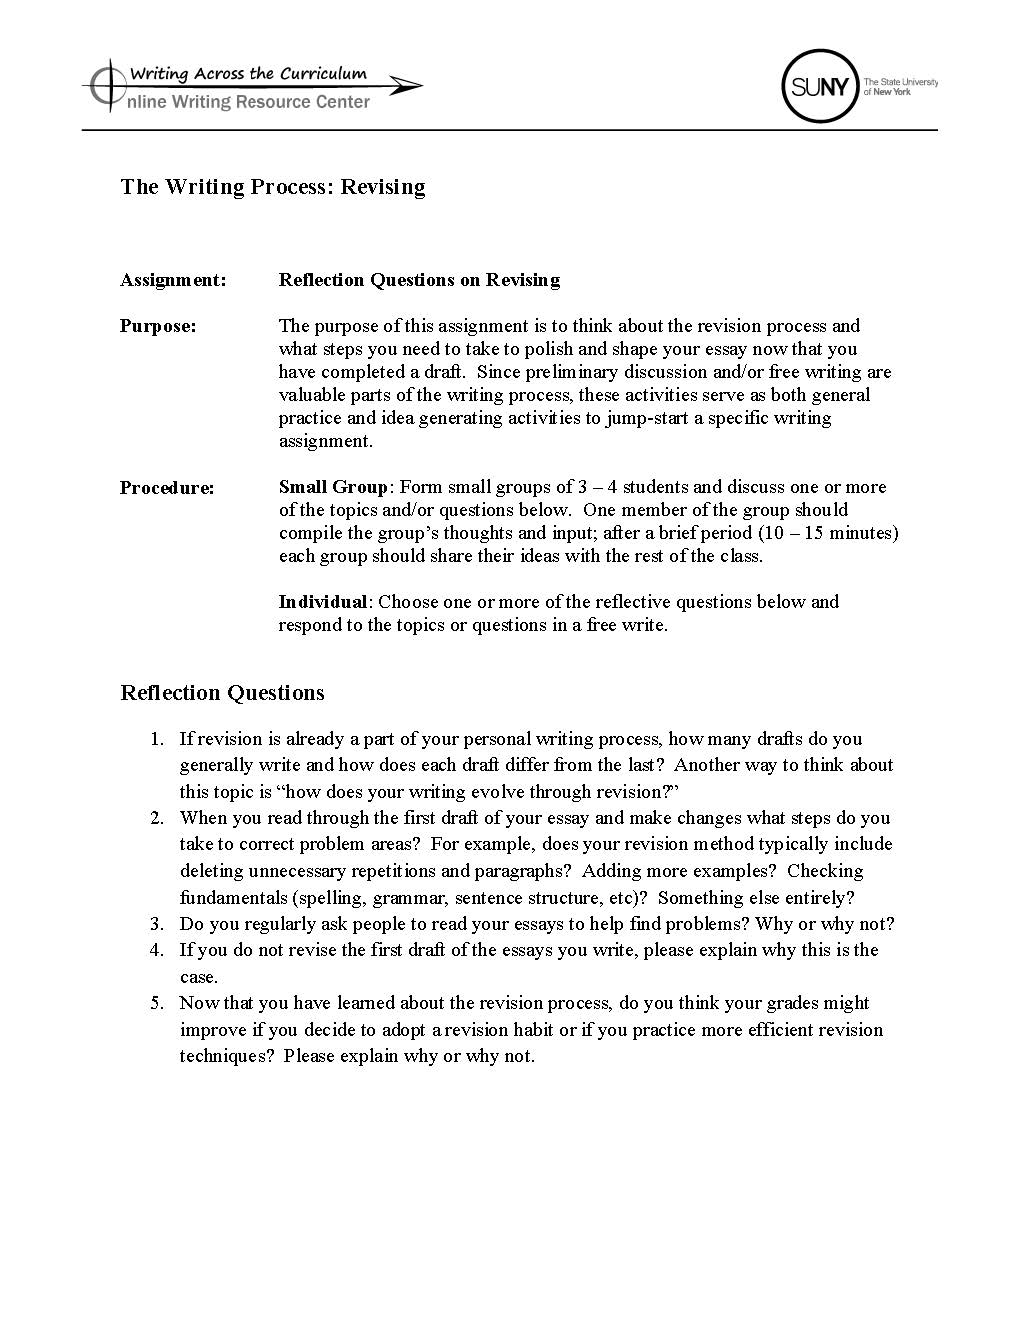 Writing across the curriculum articles